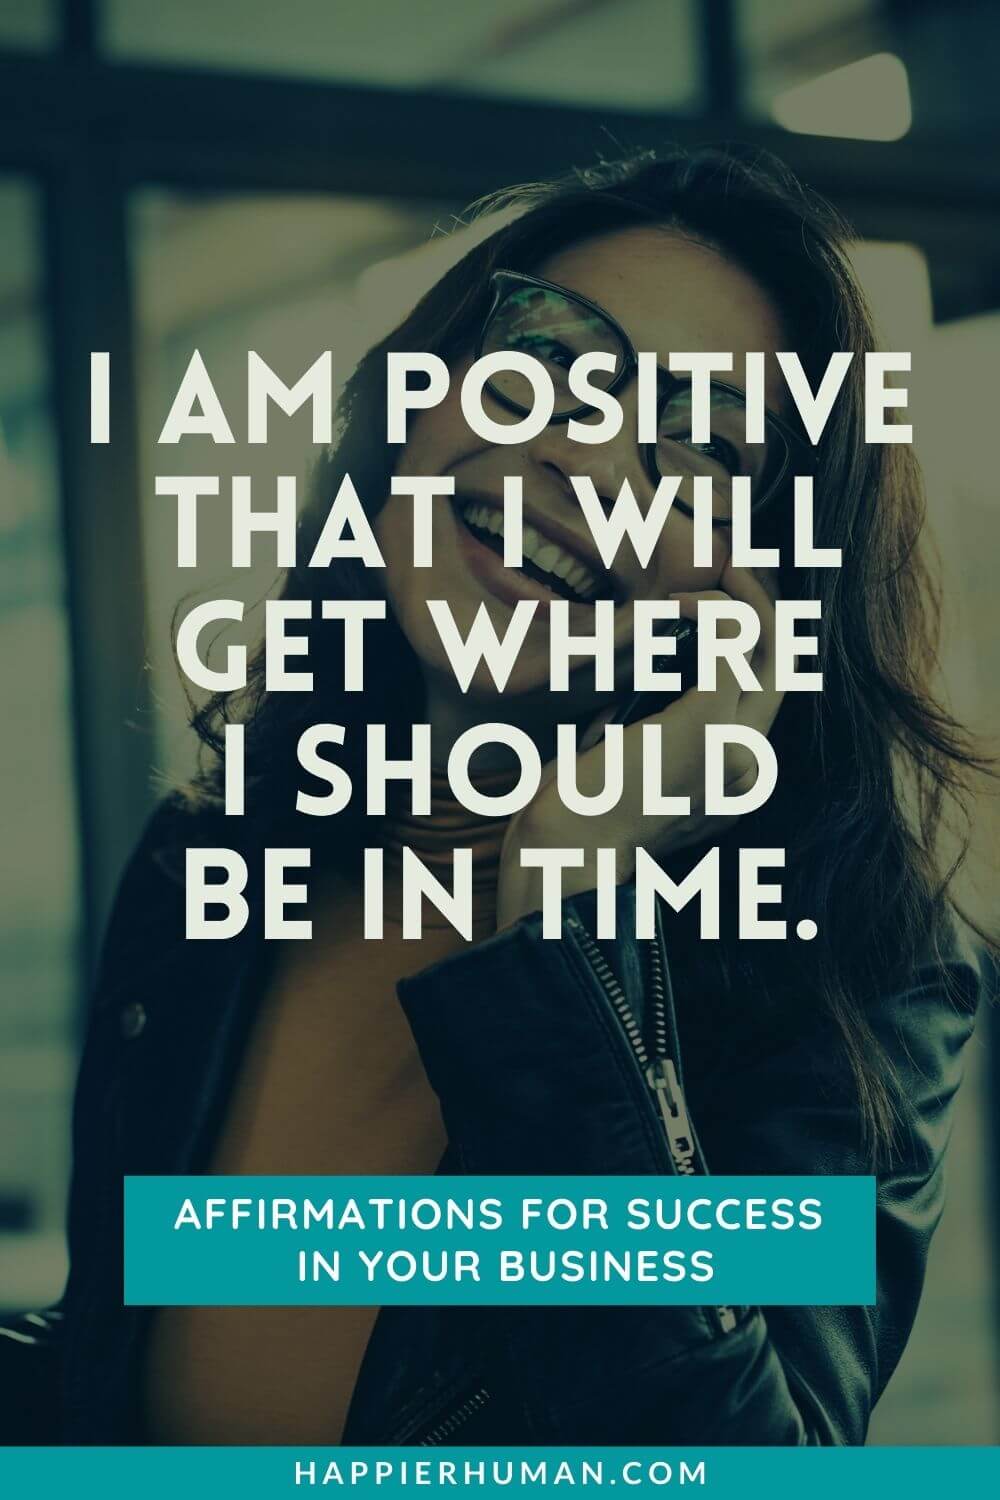 Affirmations for Success in Business - I am positive that I will get where I should be in time. | affirmations for female entrepreneurs | 10 affirmations for entrepreneurs | positive affirmations for success and wealth